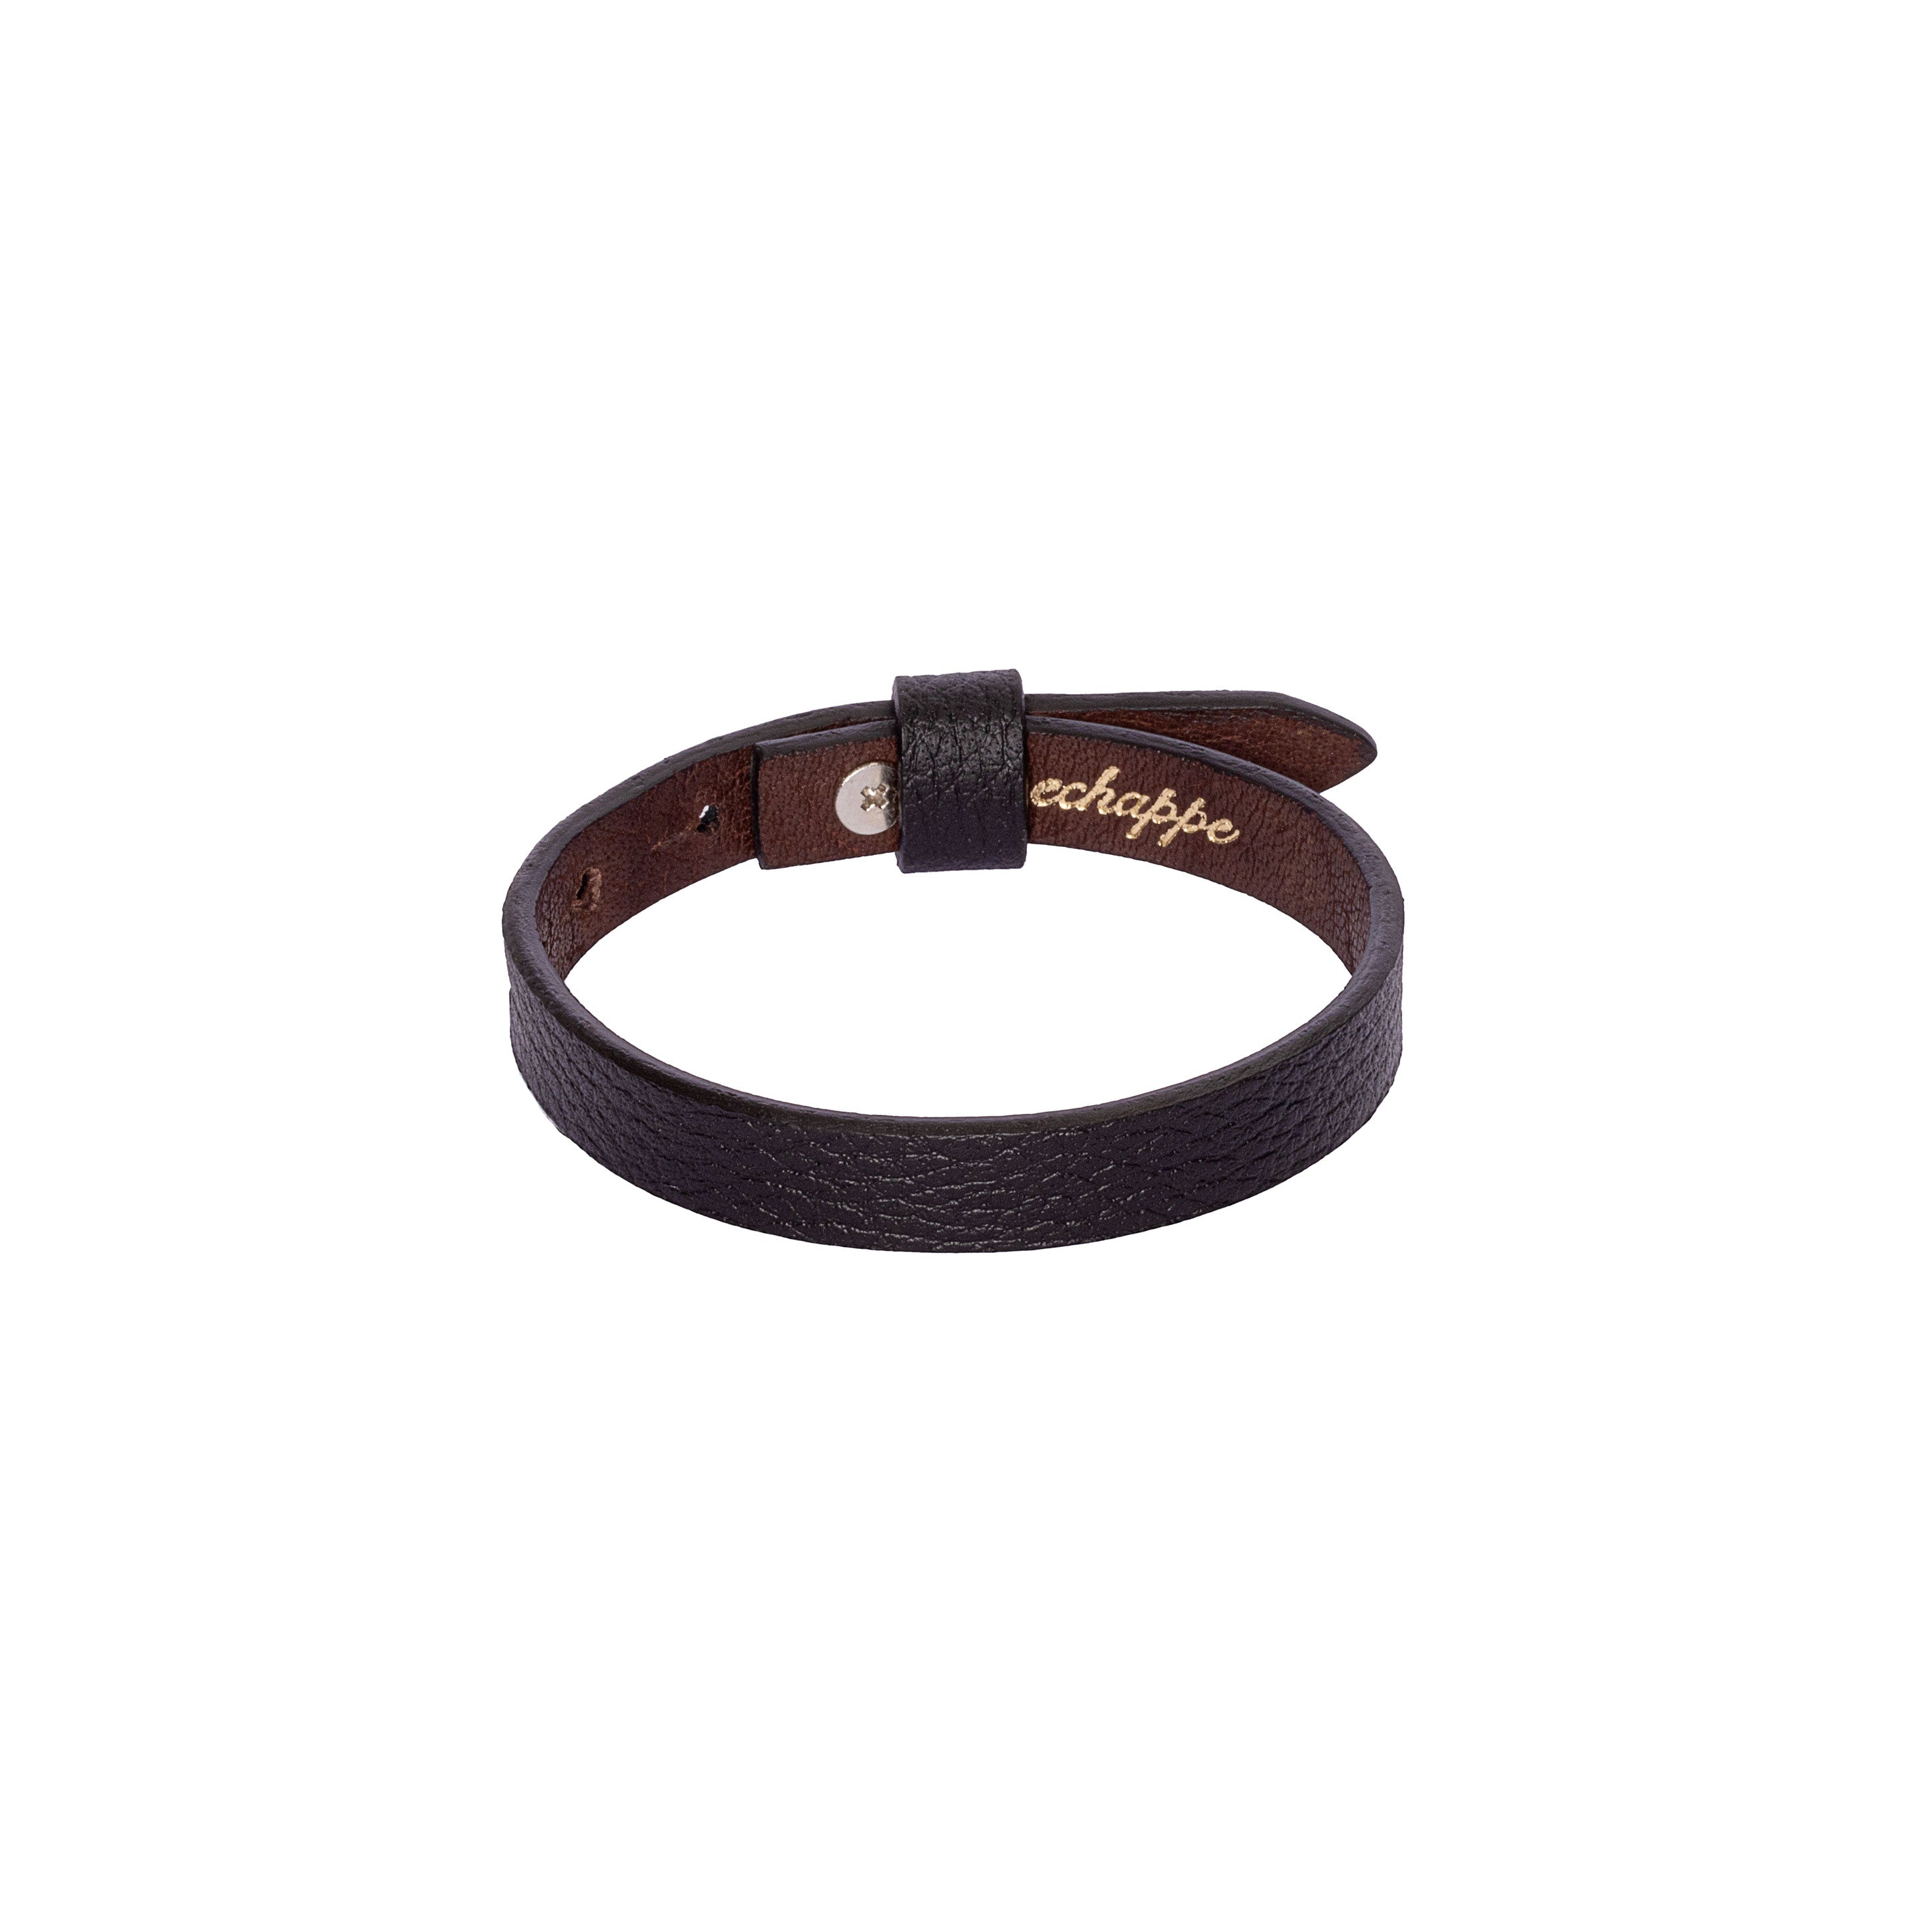 Classic Vintage Men's Double Layers Wide Leather Bracelet Wristband Cuff  Brown Y | eBay